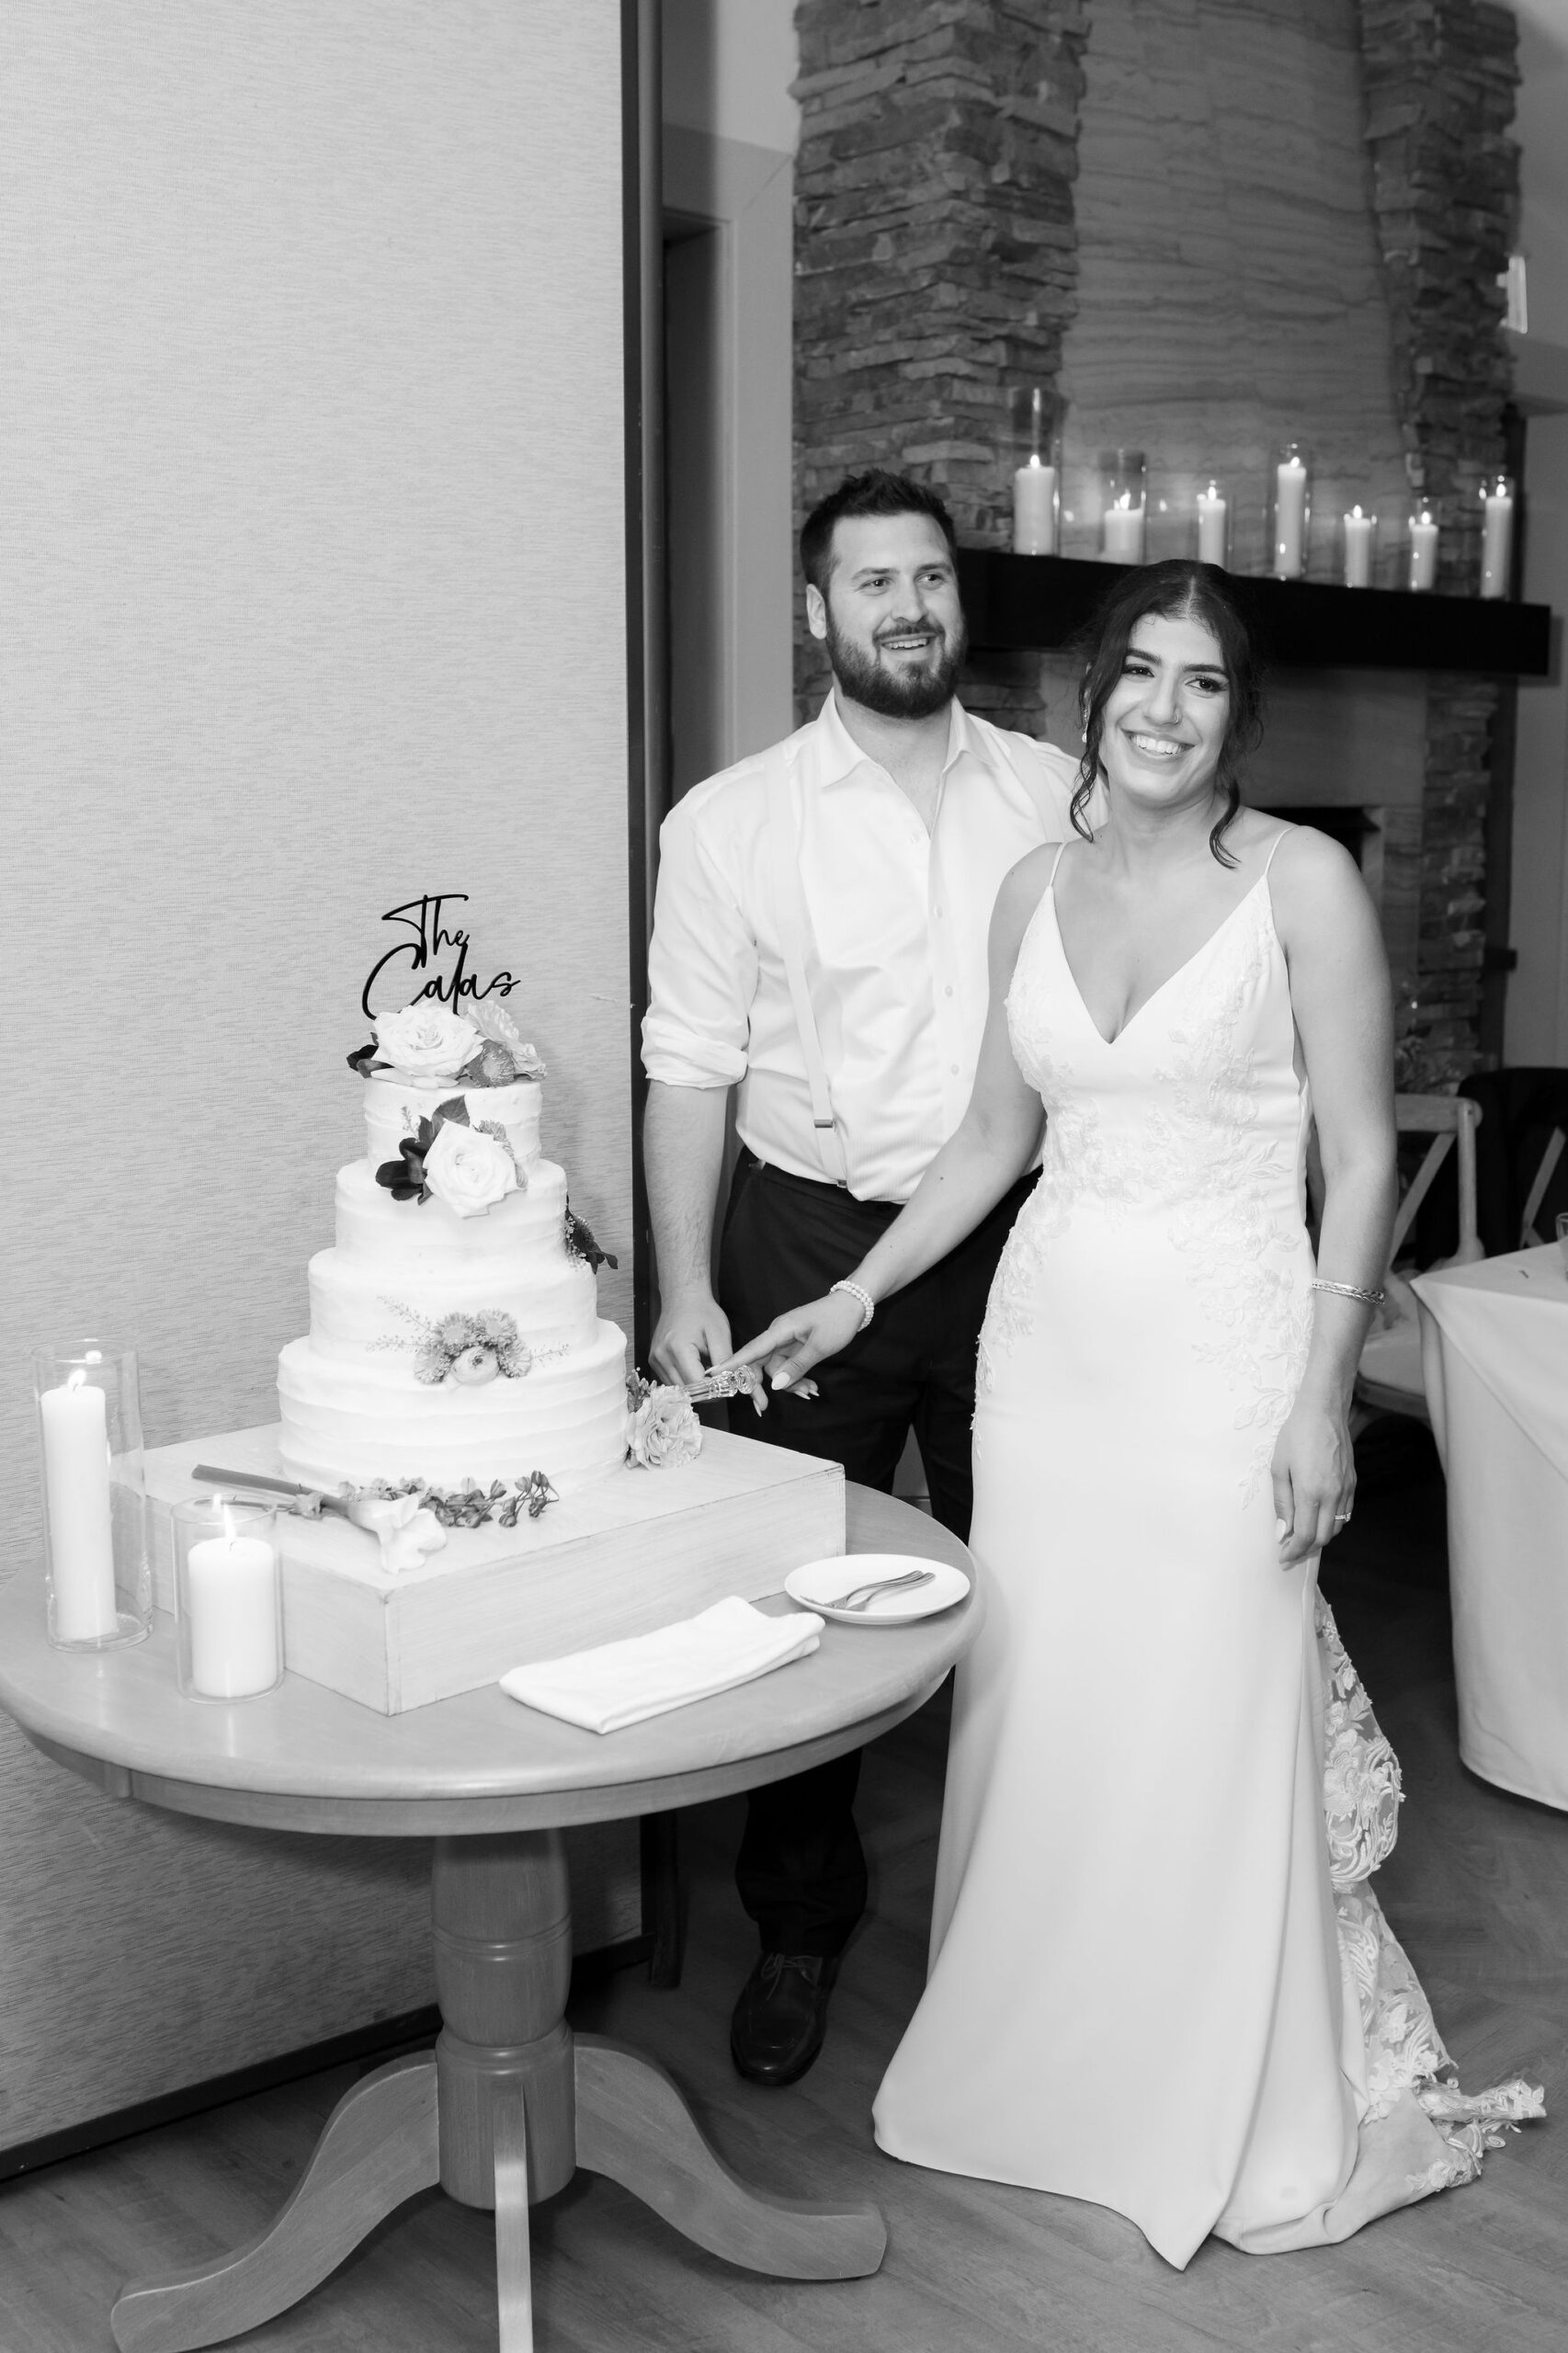 wedding reception at the Reeds by Lisa Blanche Photography